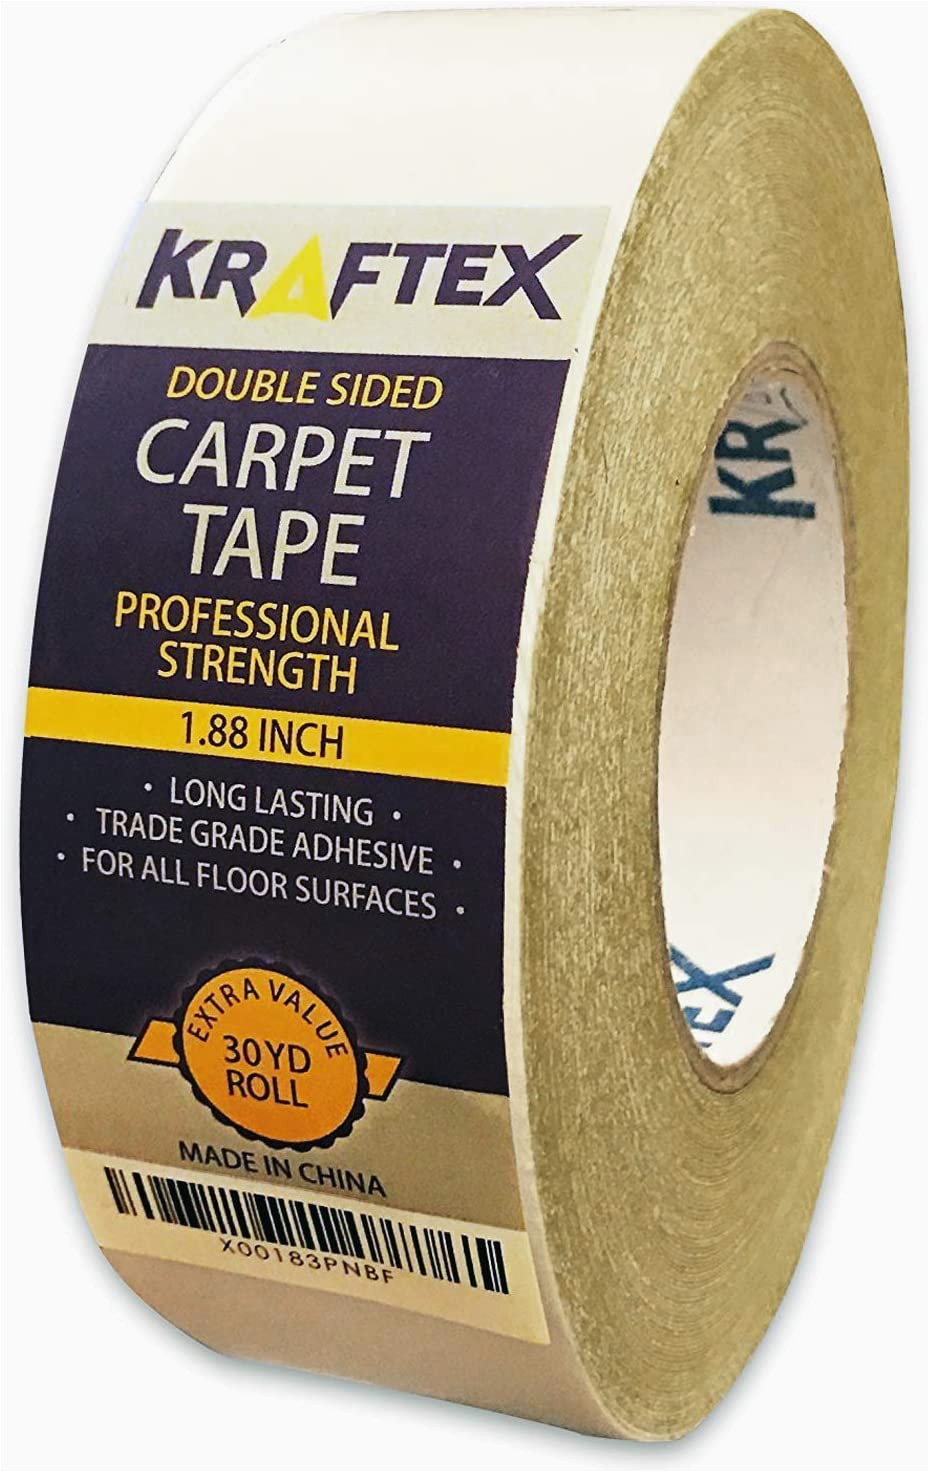 Area Rug On Carpet Tape Double Sided Carpet Tape 90ft 30yrd Roll Double Sided Tape Heavy Duty for Rugs Mats Pads & Runners Rug Tape for Hardwood Floors Tile Laminate 2